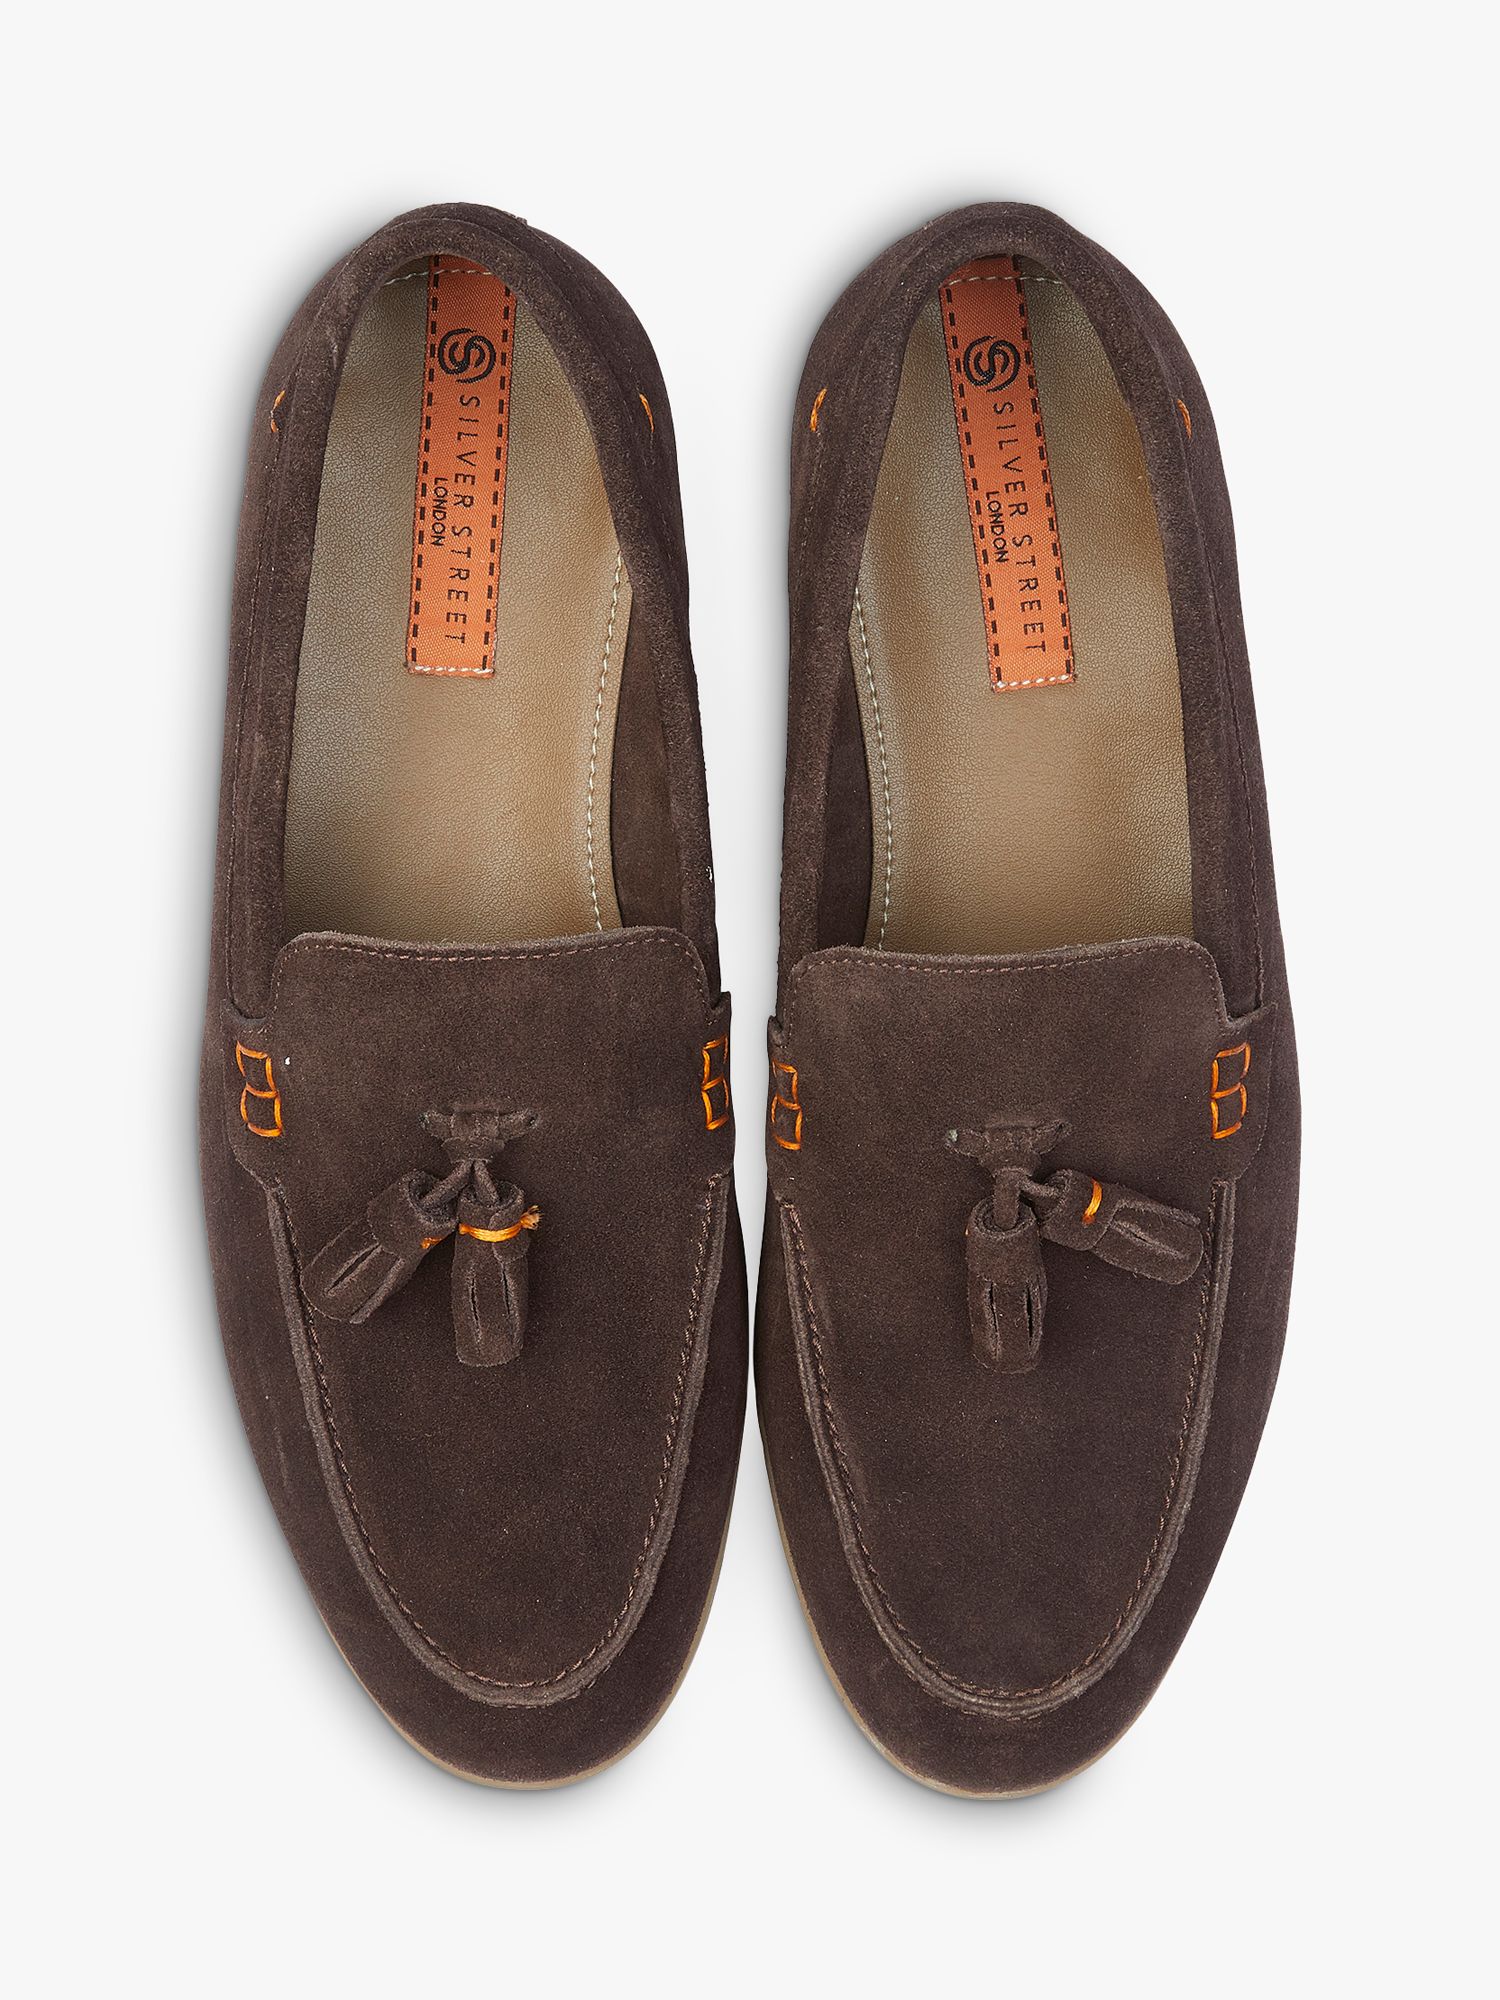 Buy Silver Street London Wembley Suede Loafers Online at johnlewis.com